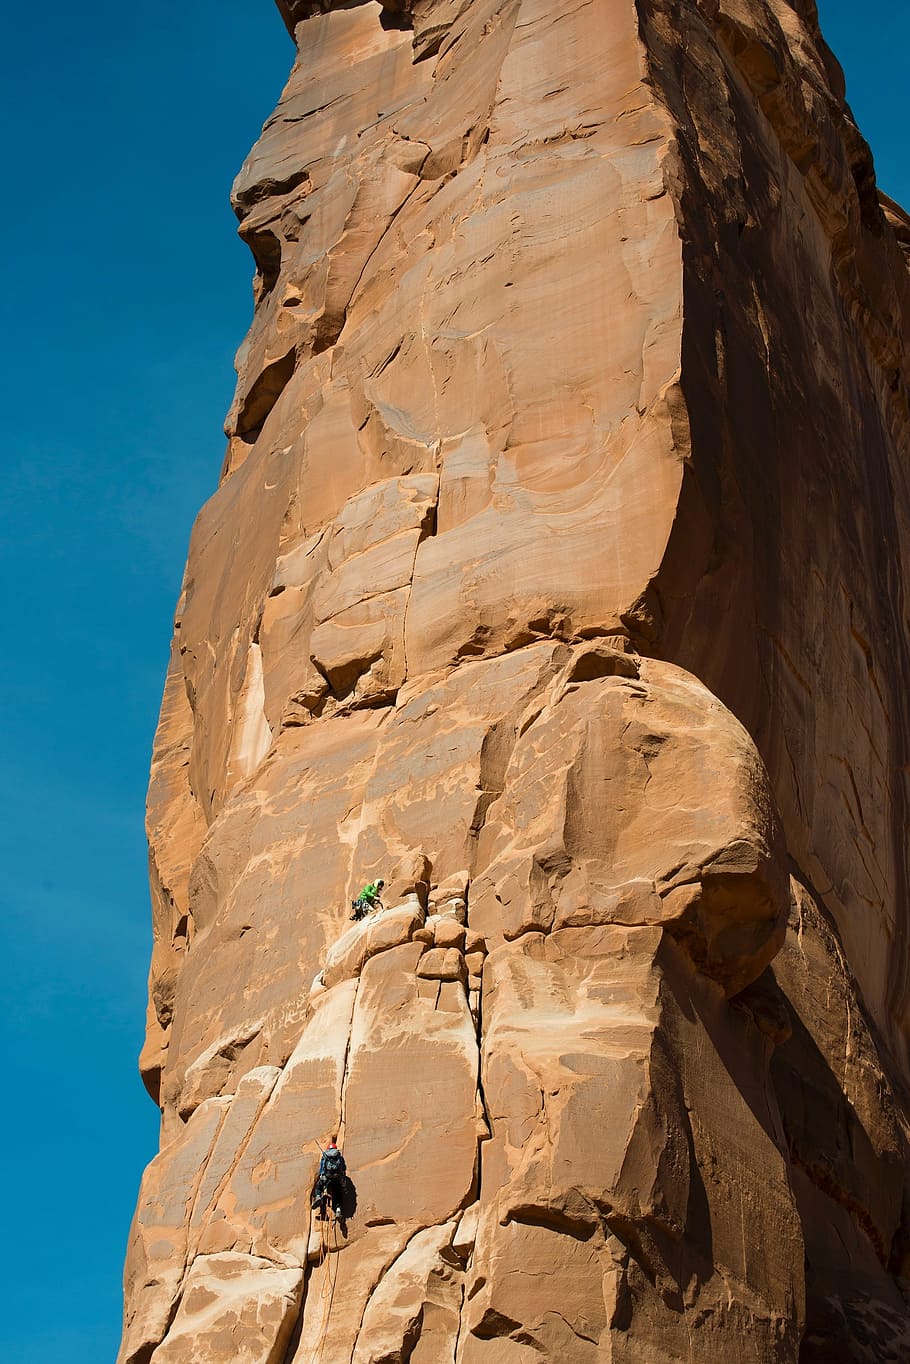 climbing, rappelling, rope, cliff, landscape, abseiling, outdoors, recreation, rocks, sport